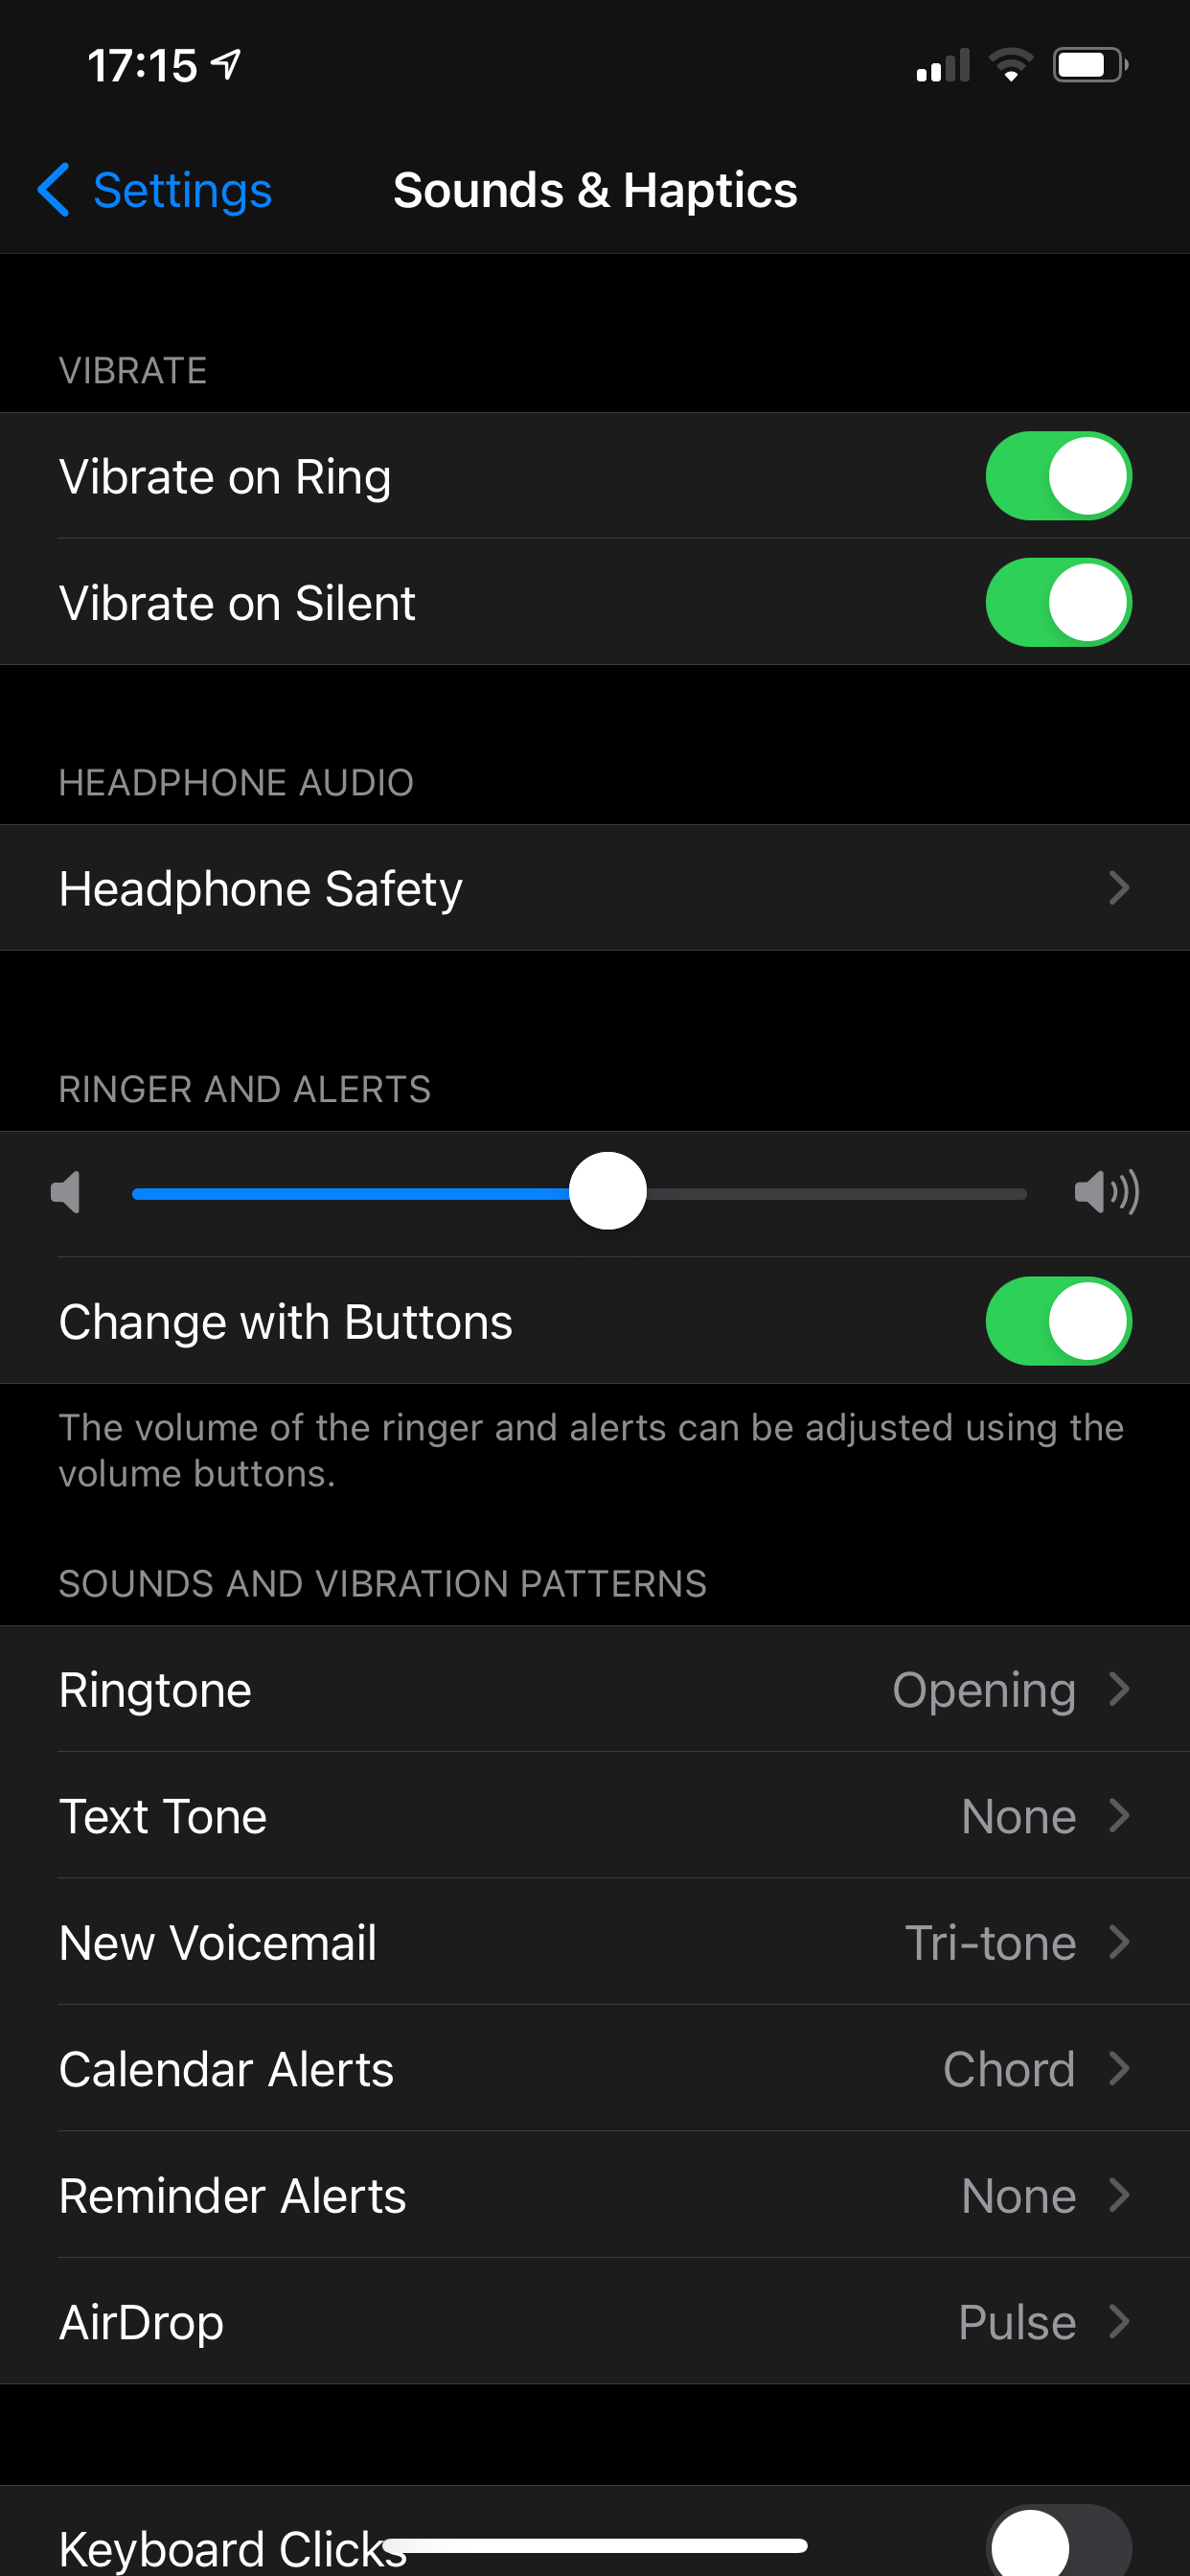 A screenshot of the vibrate toggles in Settings.